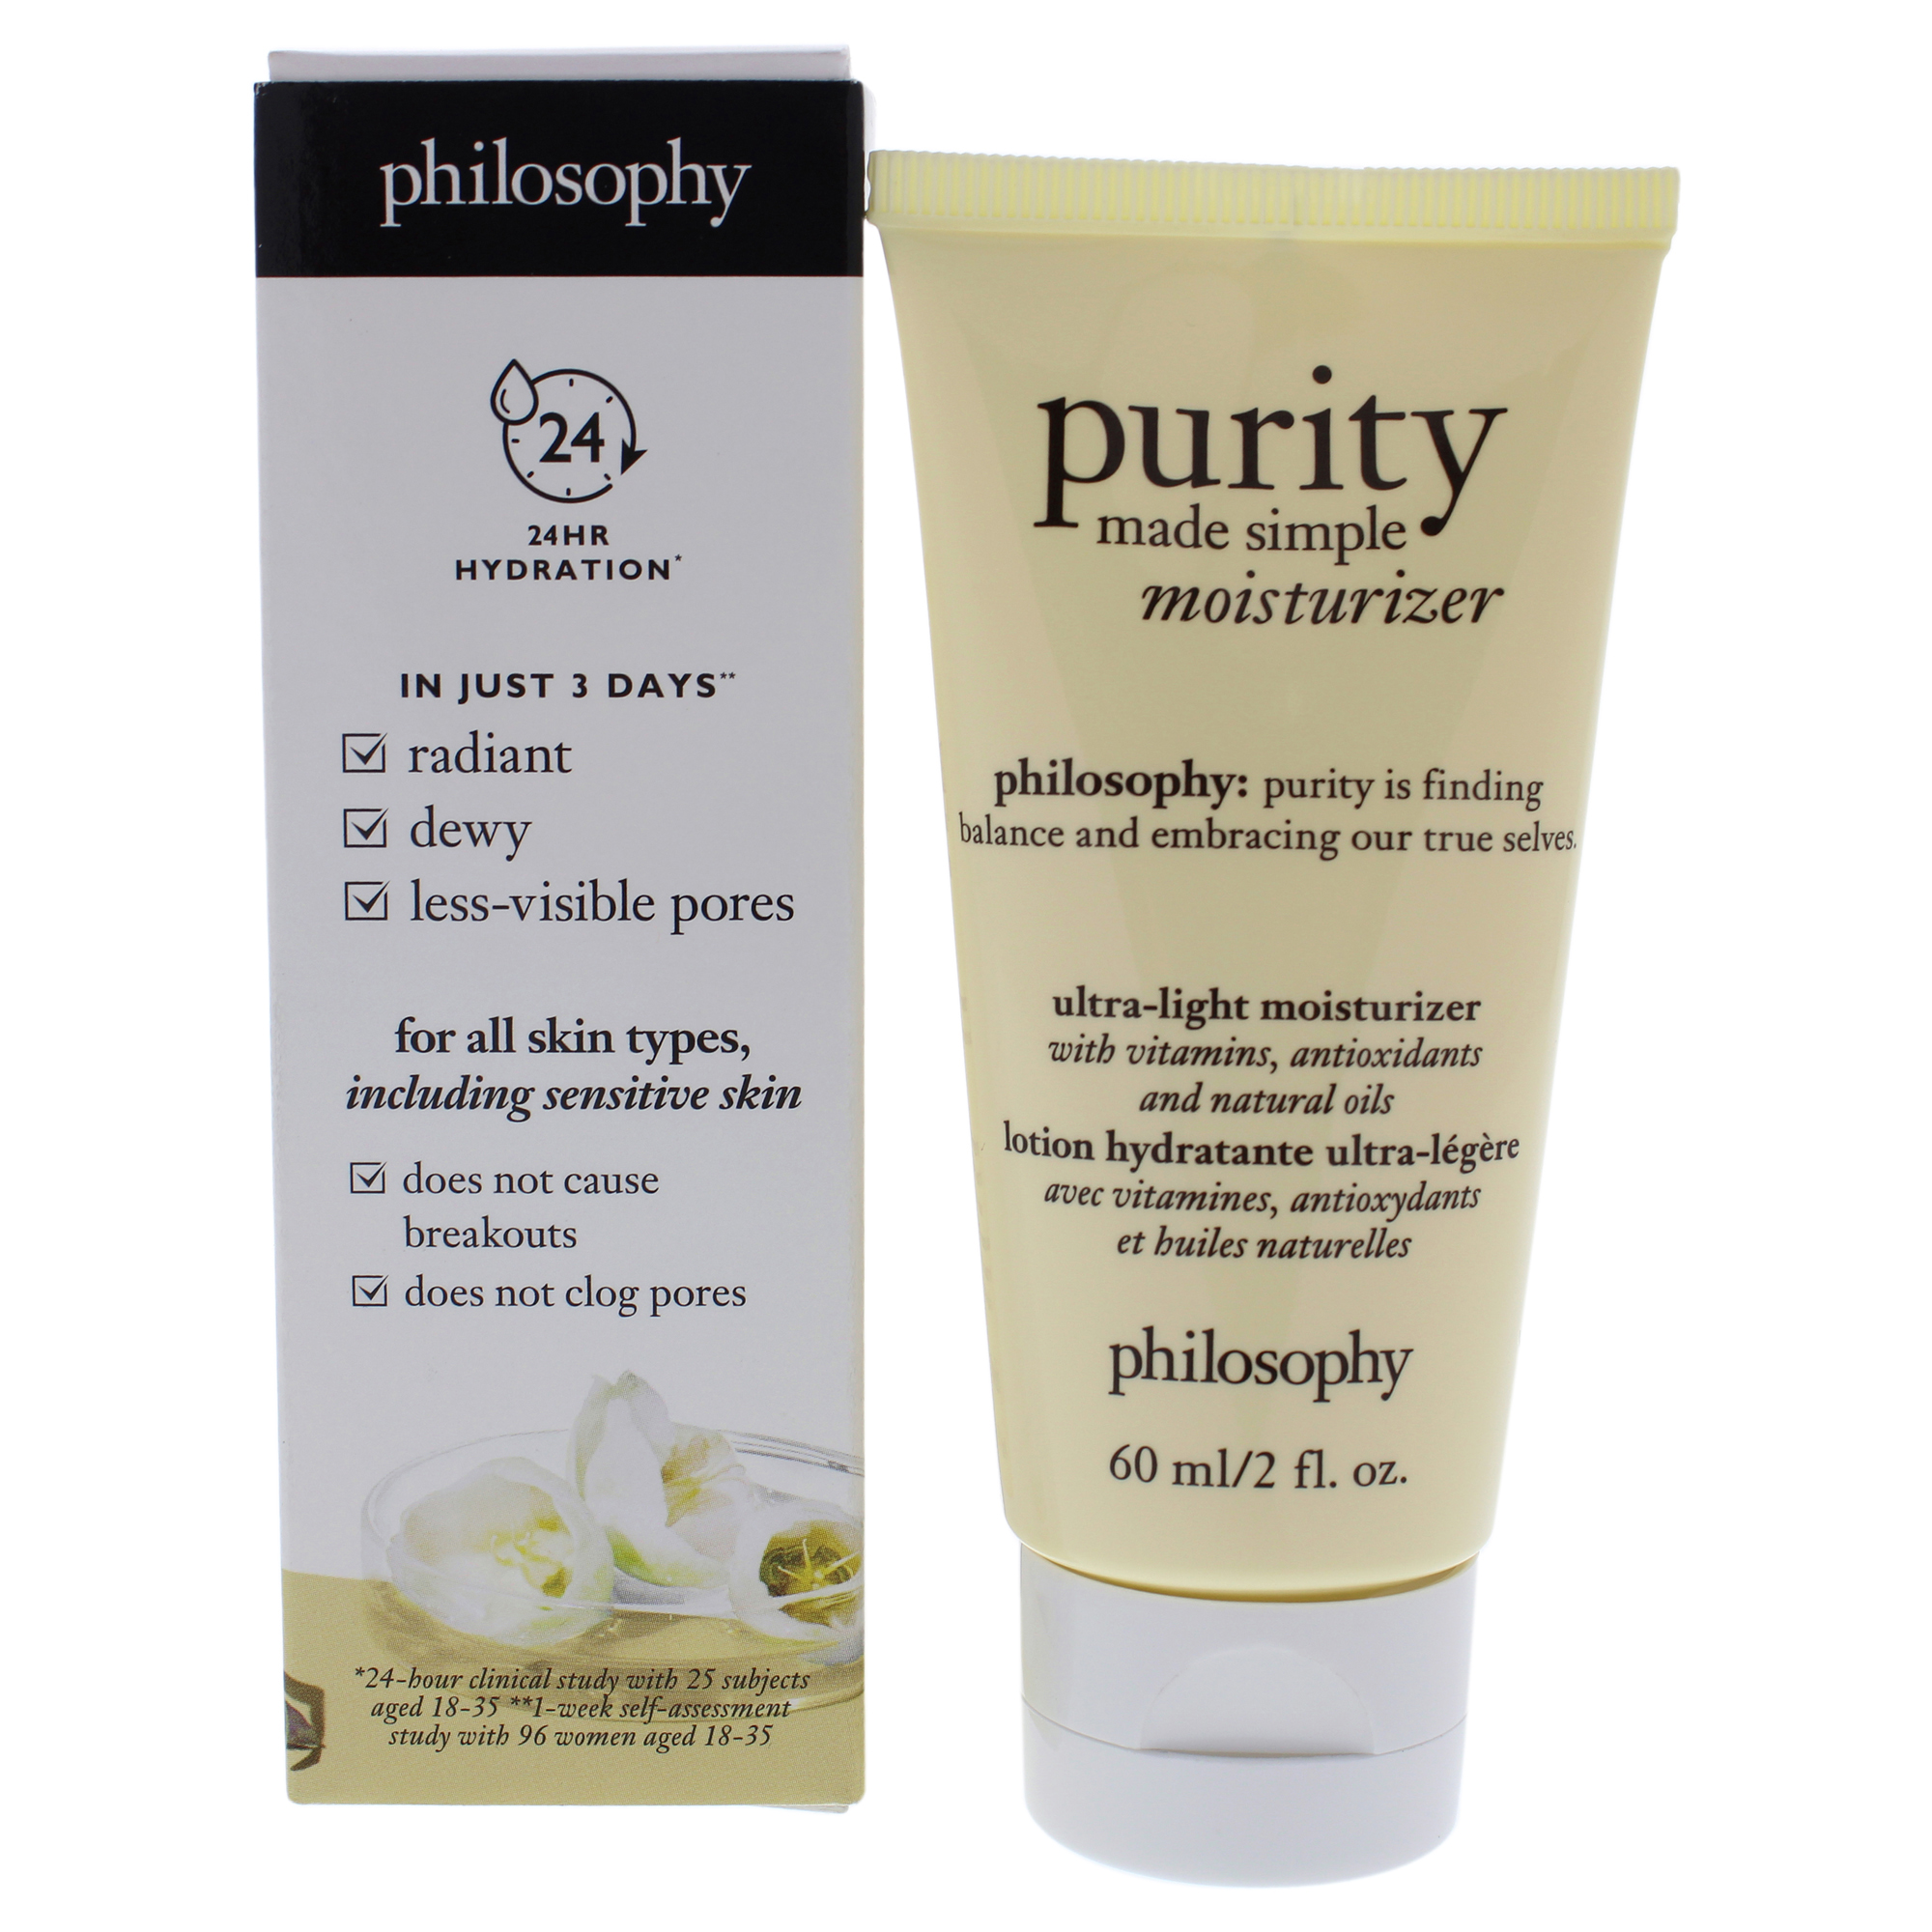 Purity Made Simple Moisturizer by Philosophy for Unisex - 2 oz Moisturizer